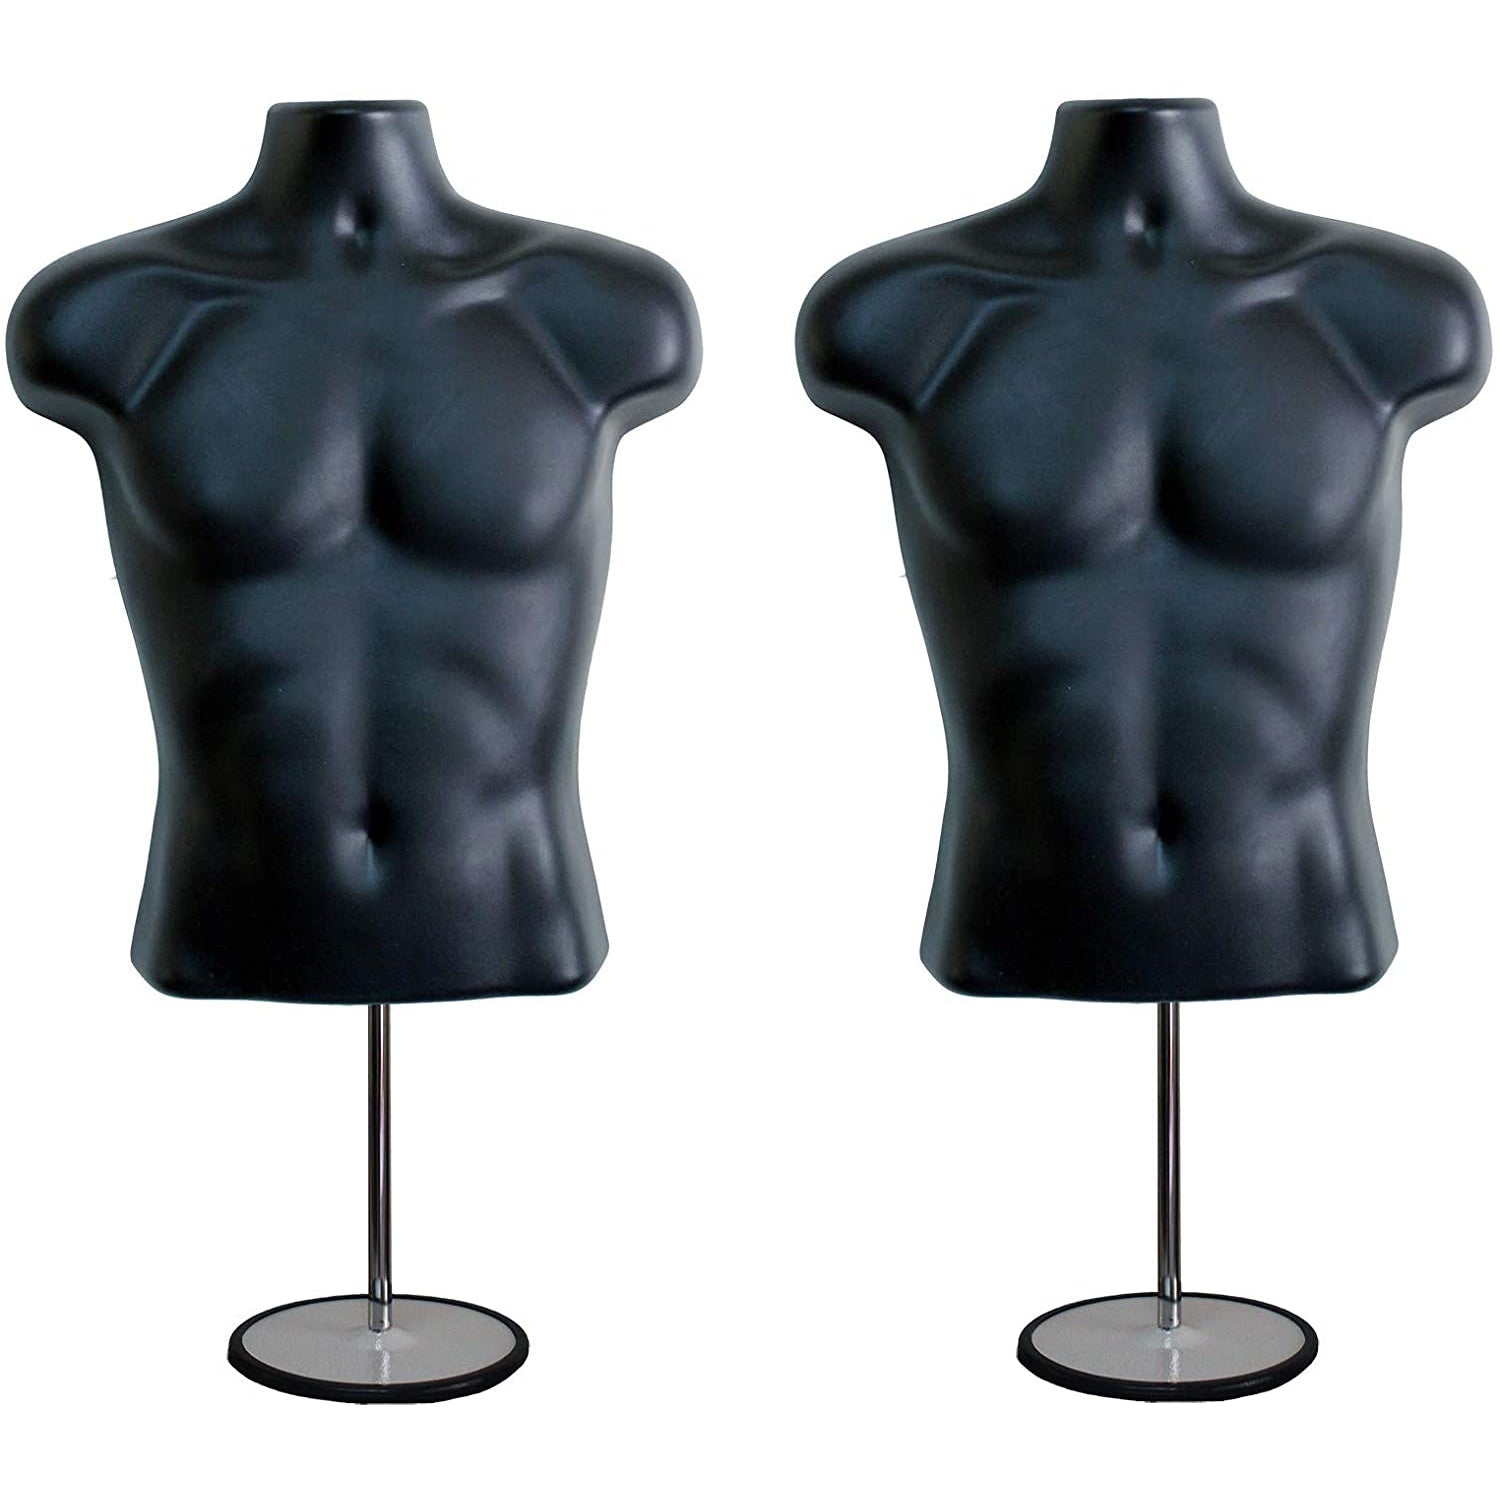 Female Mannequin Stand In White Color For S-M Clothe Sizes